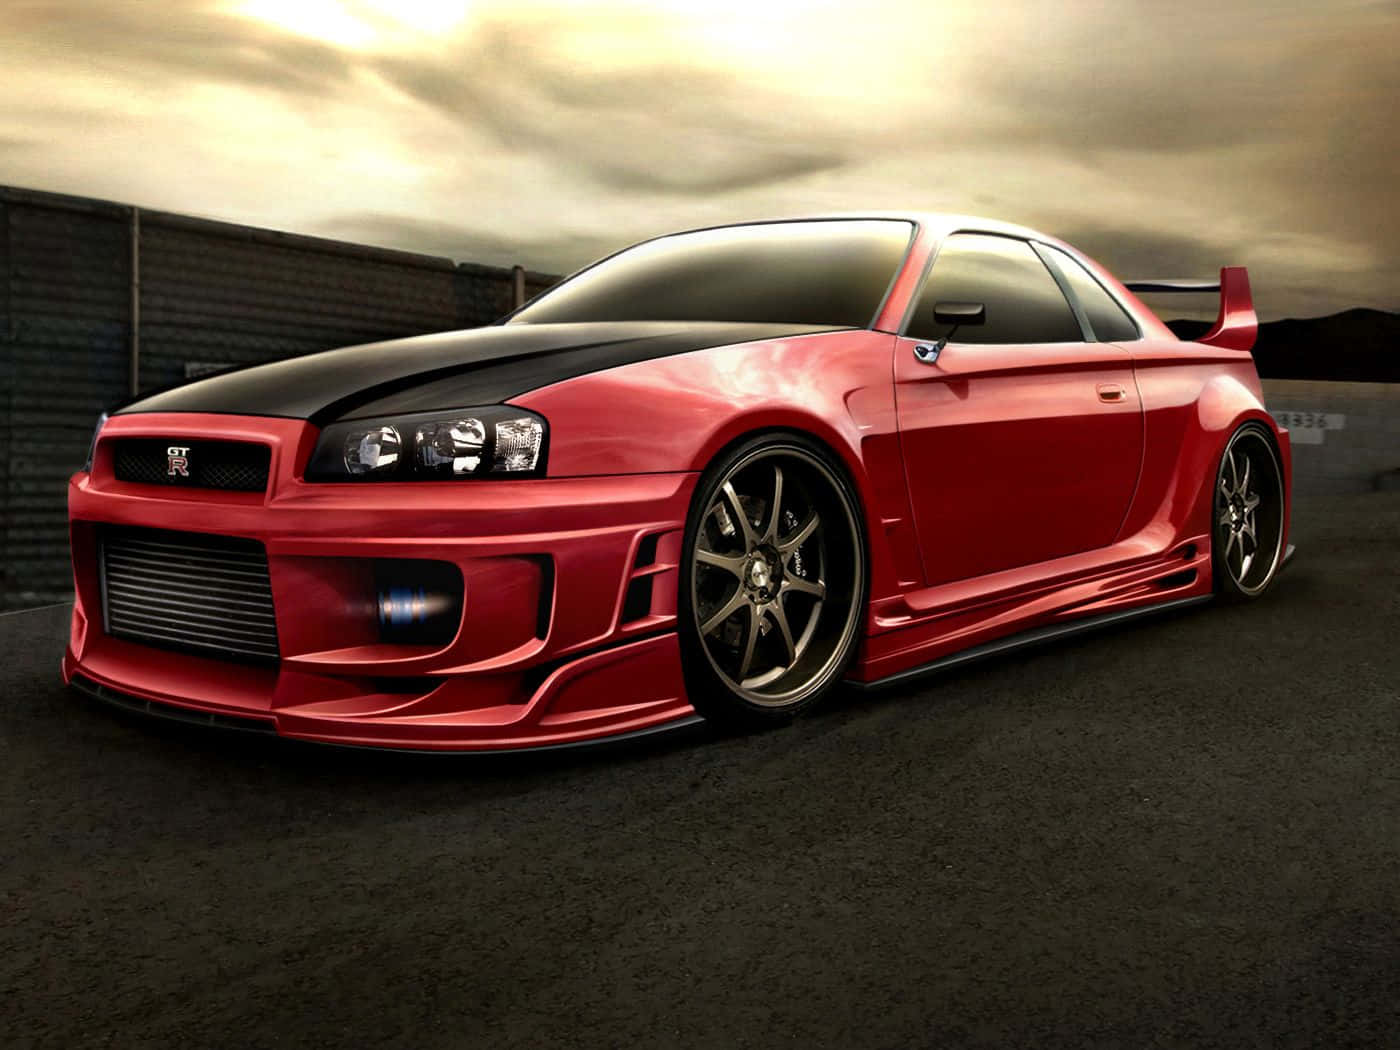 Look at the Cool Nissan Skyline Wallpaper